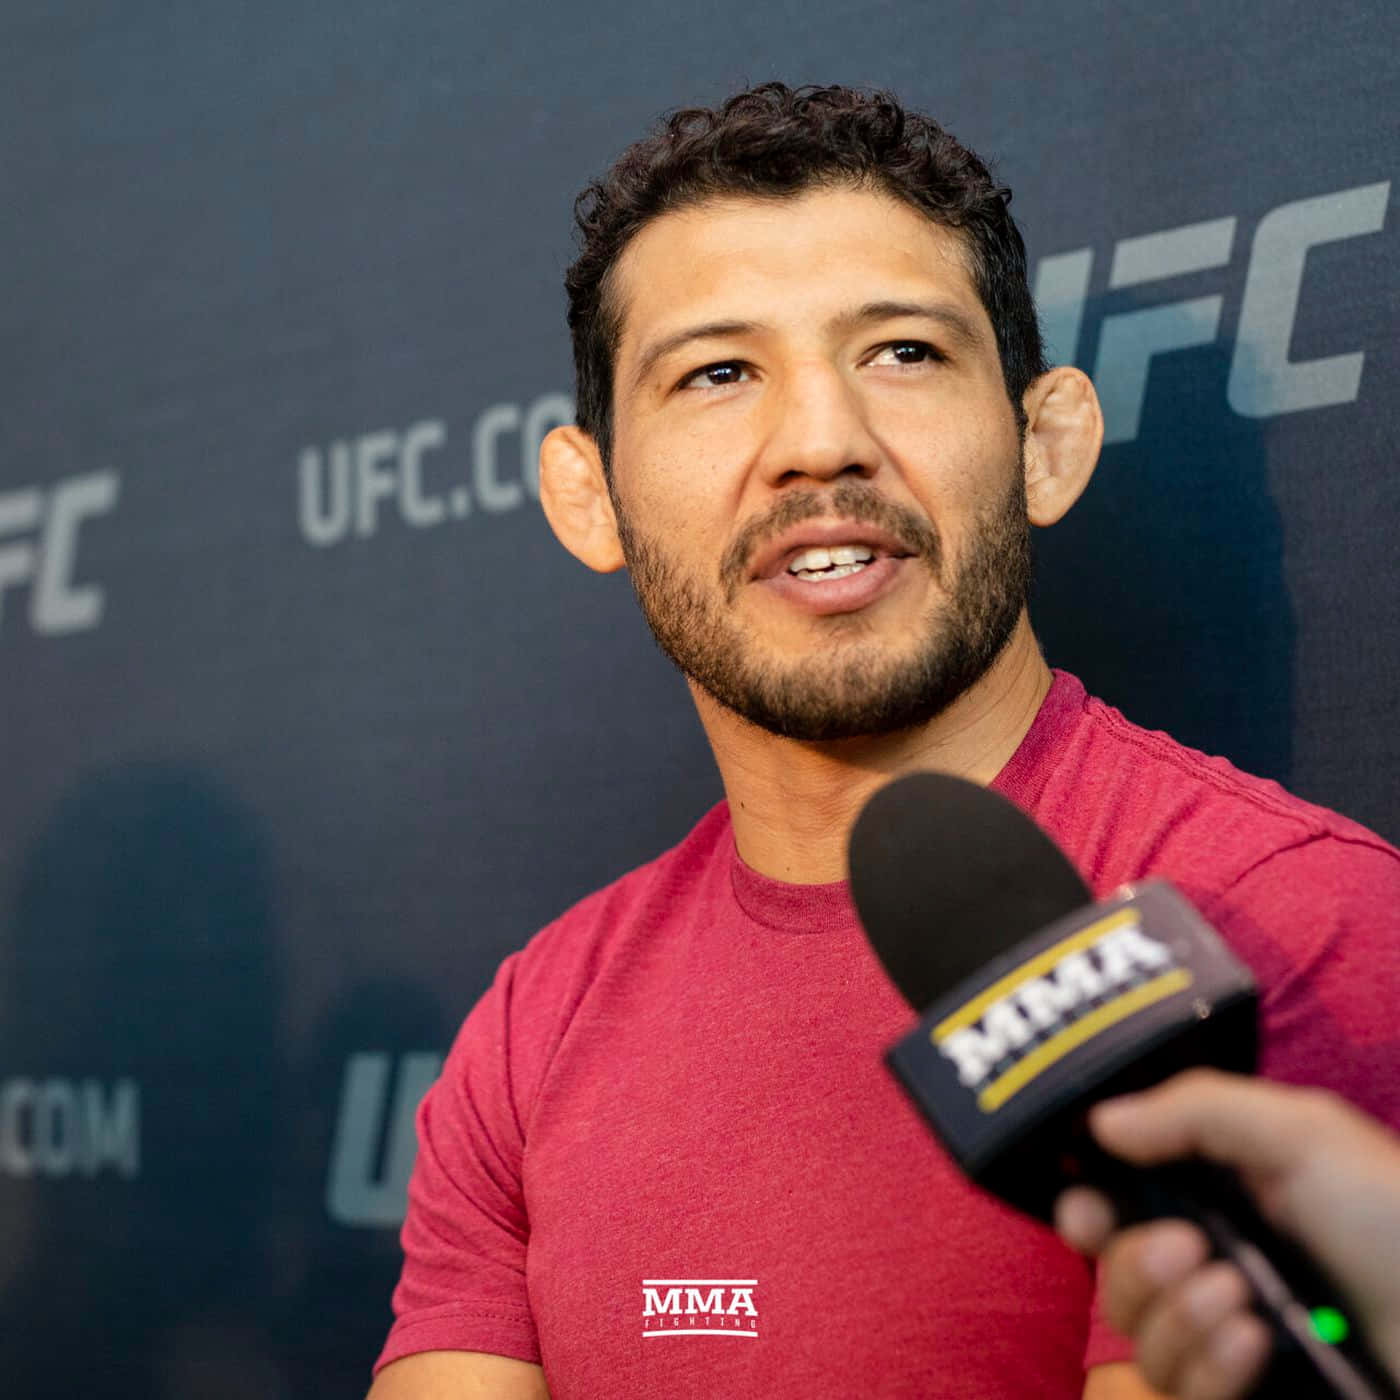 Gilbertmelendez Ufc Interview Is Not A Sentence Related To Computer Or Mobile Wallpaper. Could You Please Provide A Sentence In That Context For Me To Translate Into German? Wallpaper